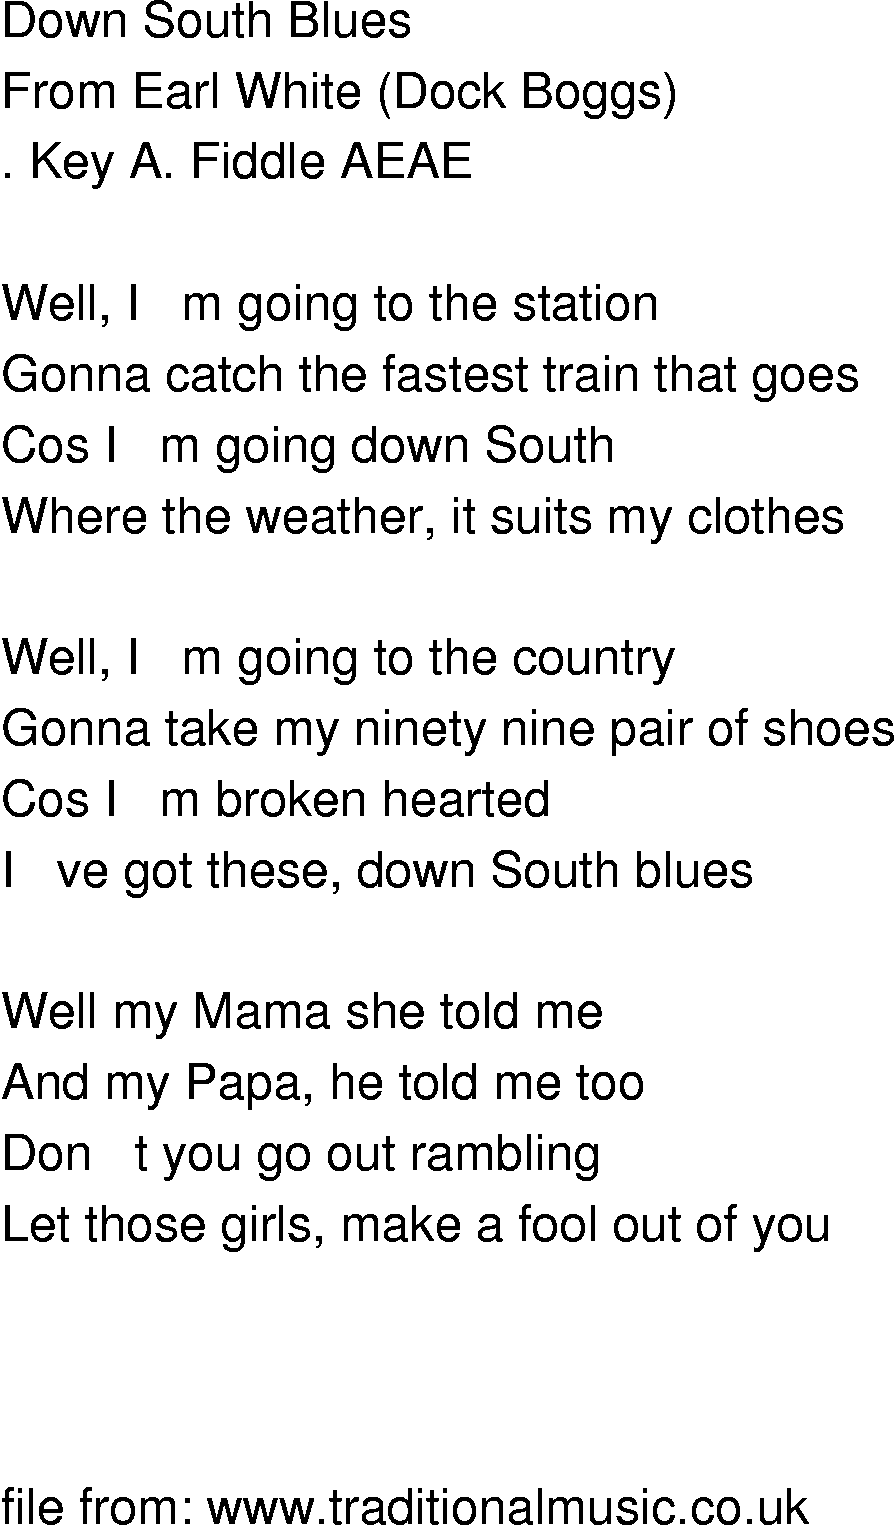 Old-Time (oldtimey) Song Lyrics - down south blues